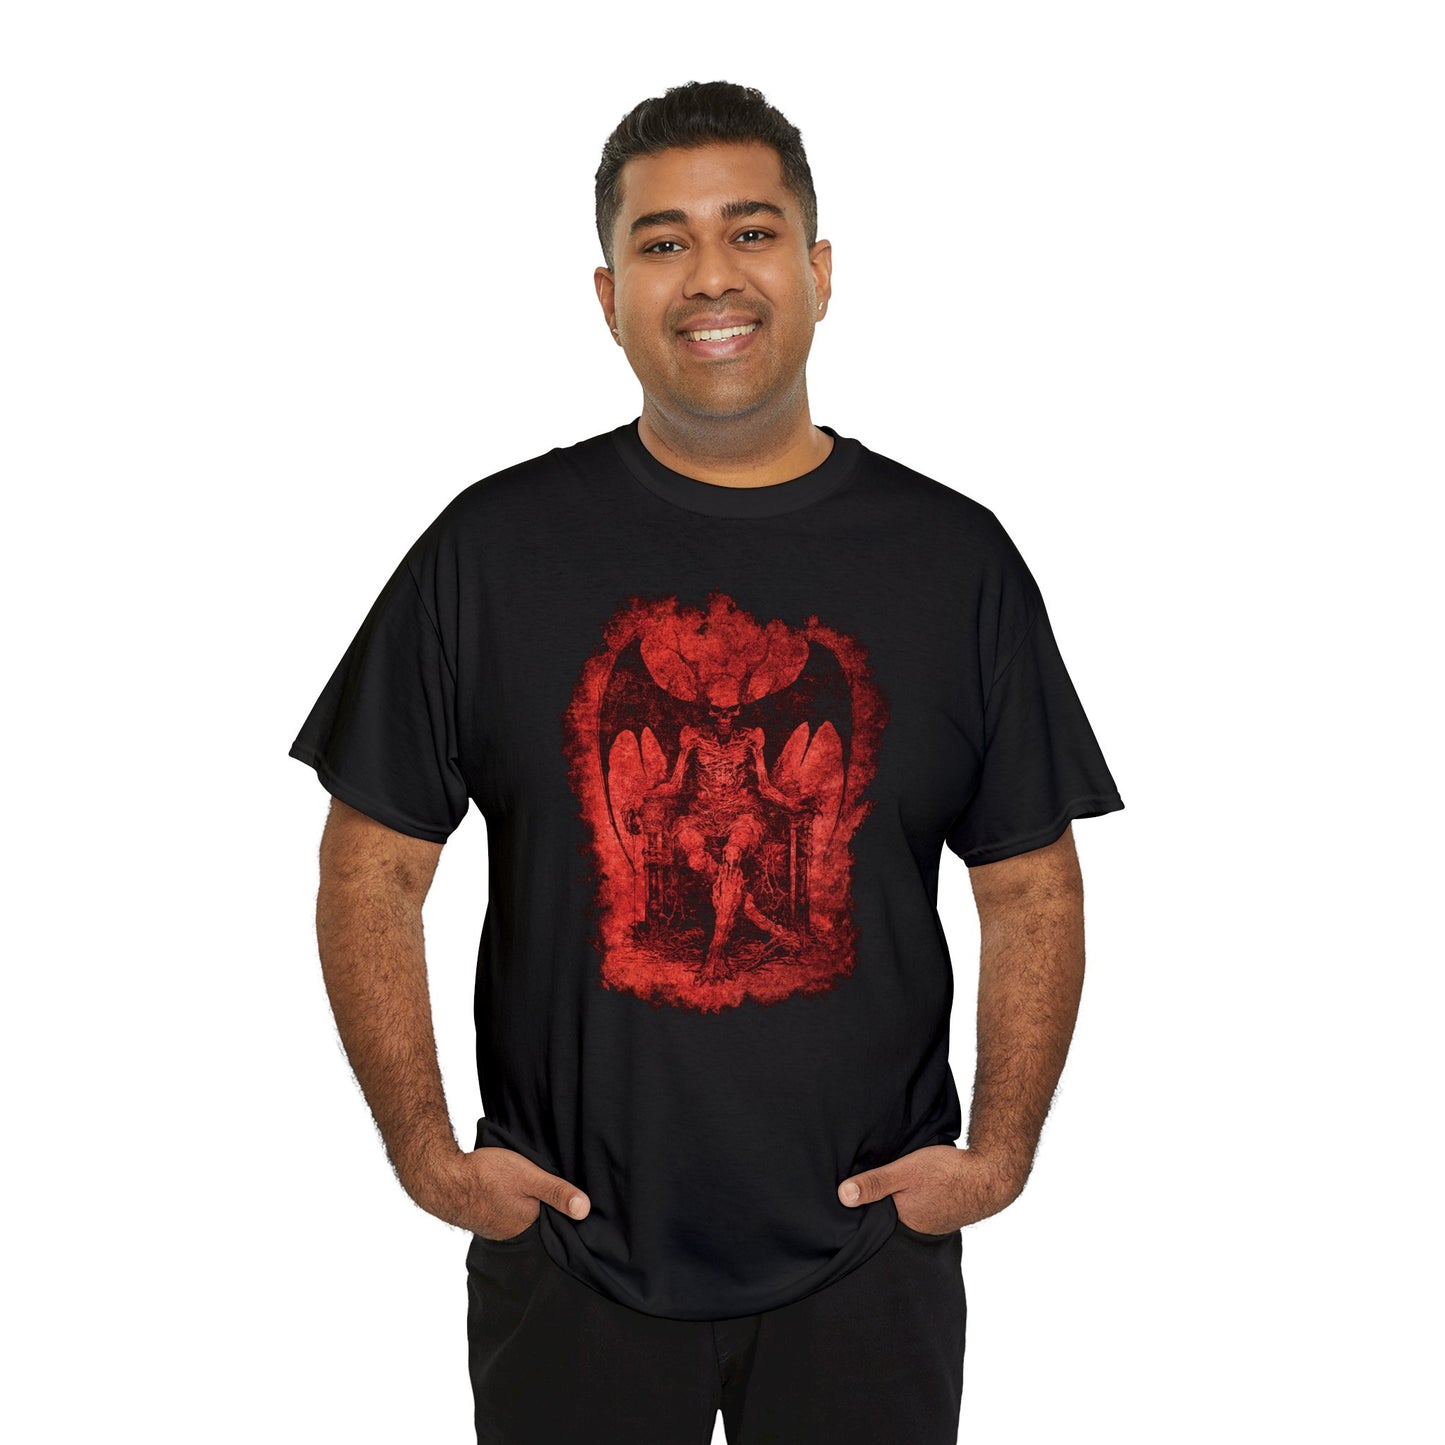 Unisex T-shirt Devil on his Throne in Red - Frogos Design